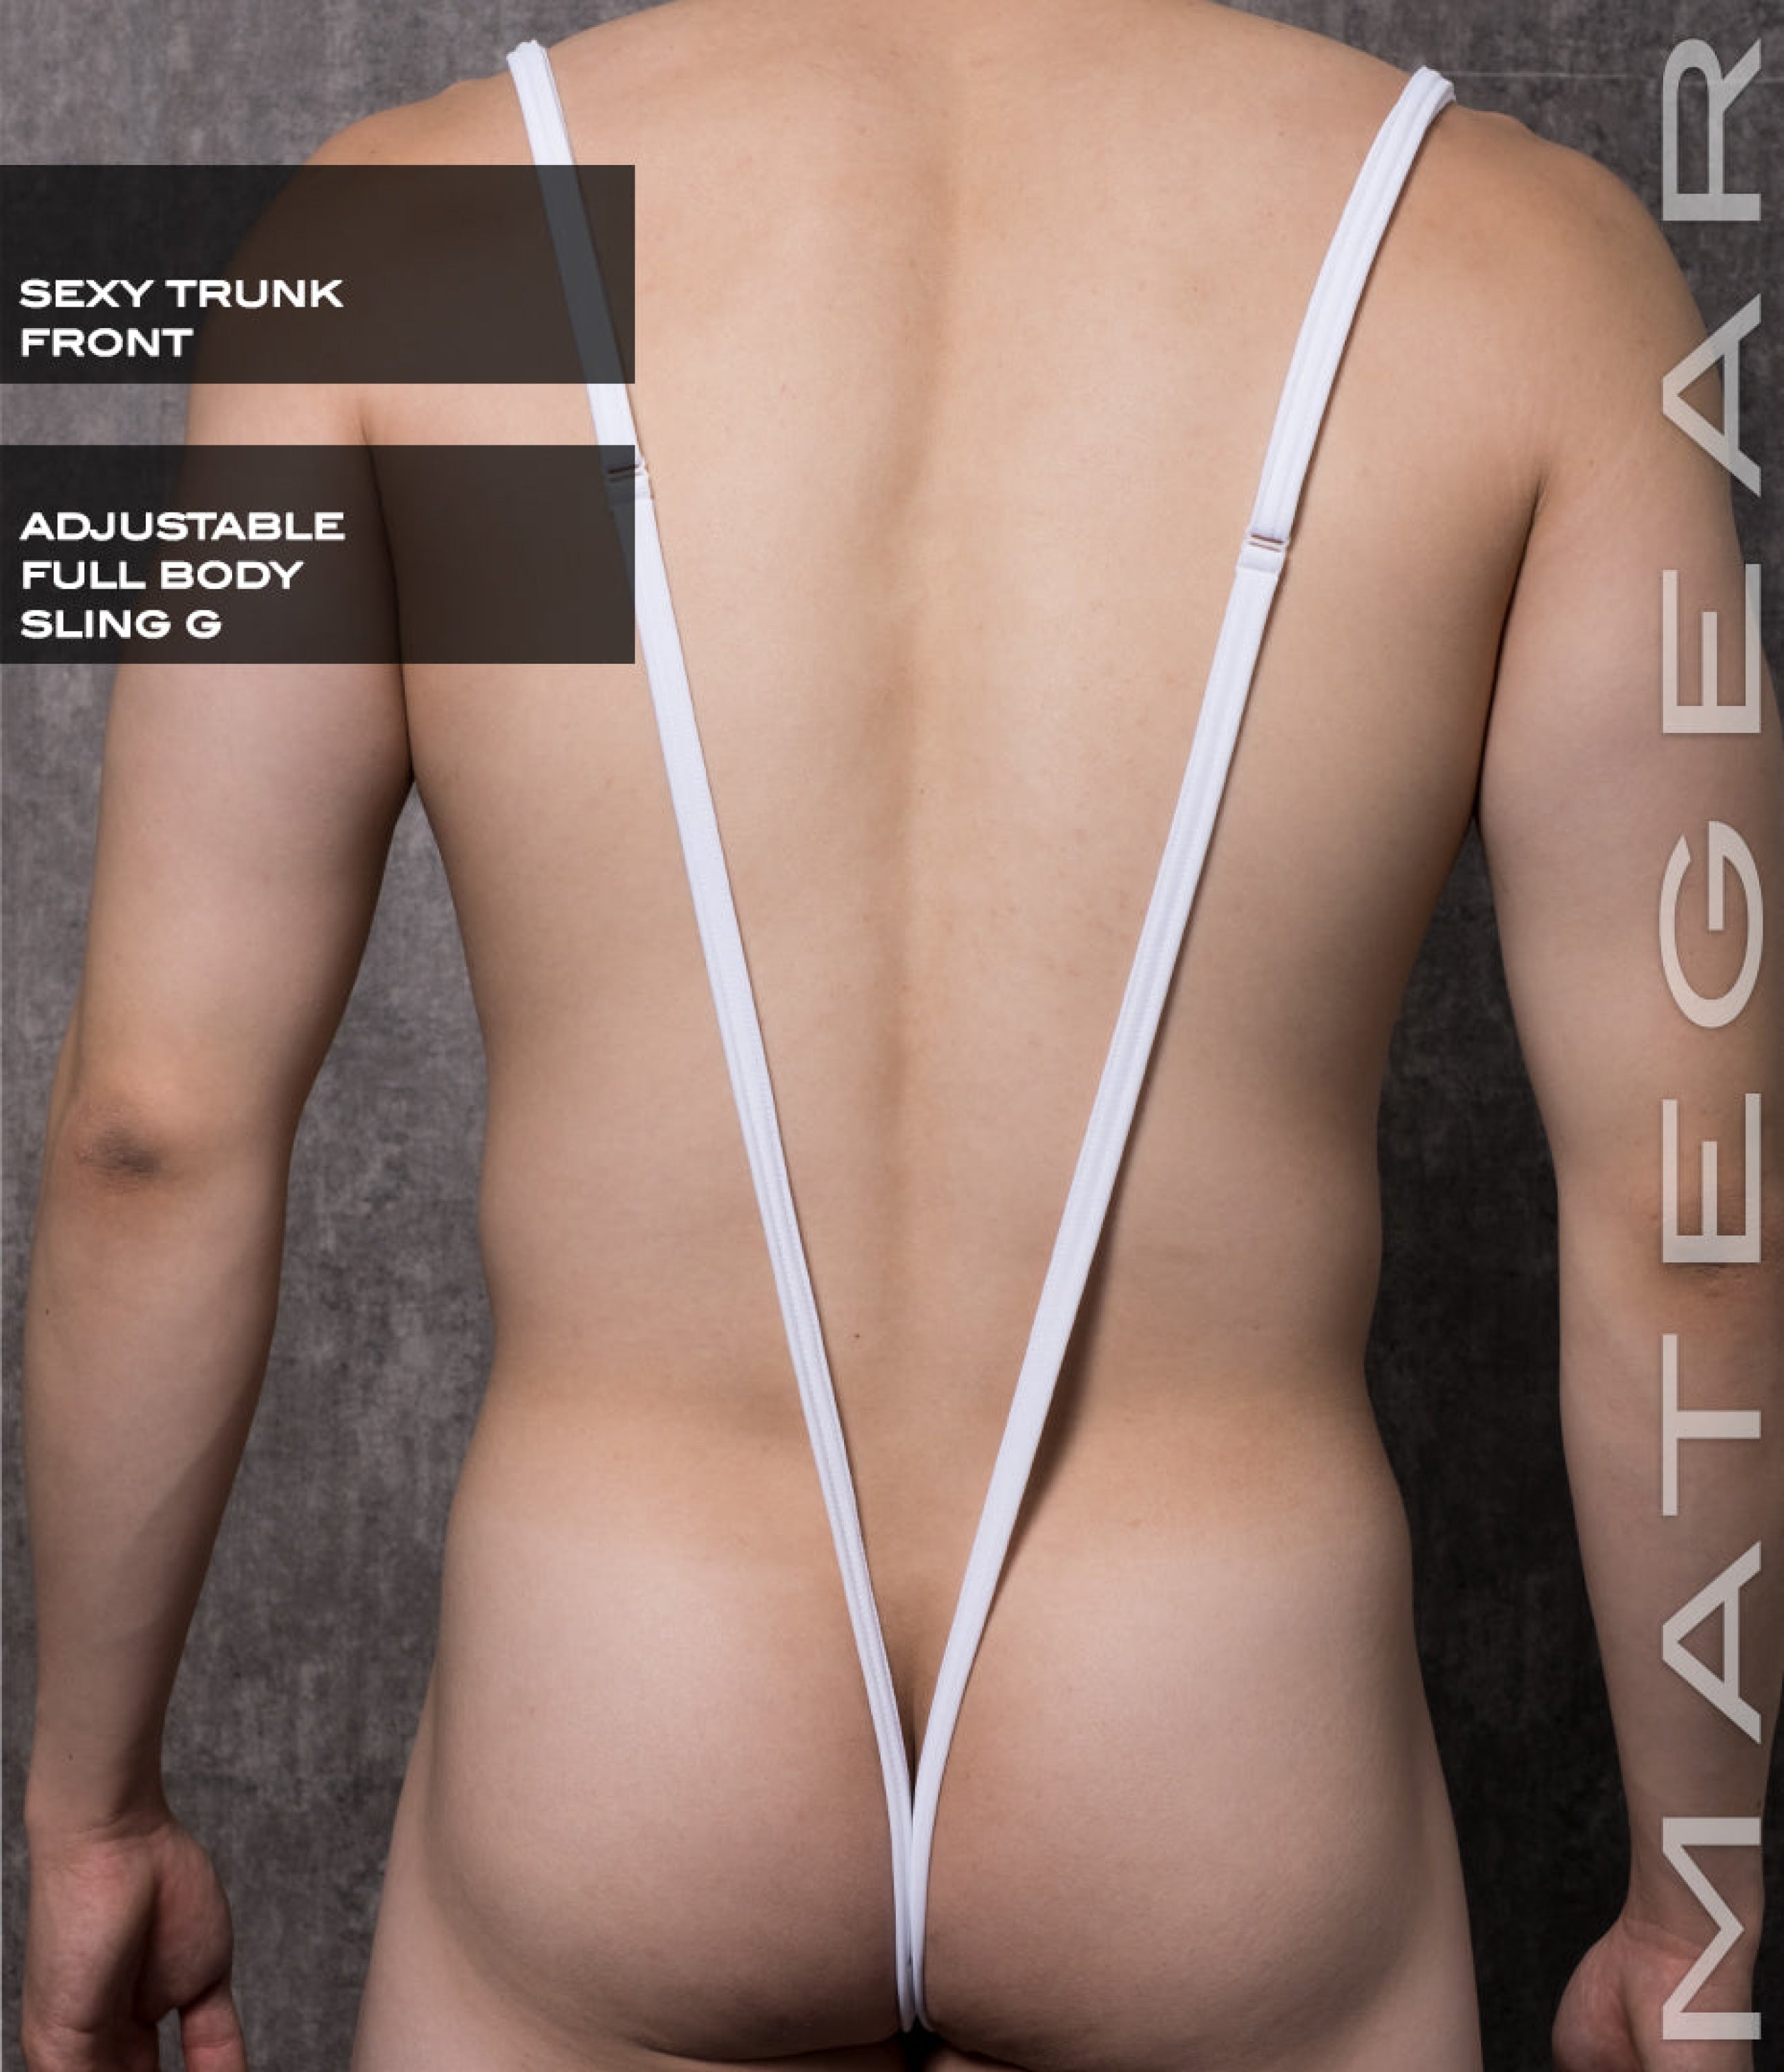 Sexy Mens Underwear Xpression Ultra G - Gal Dae (Adjustable Sling / Trunk Front White Full Body